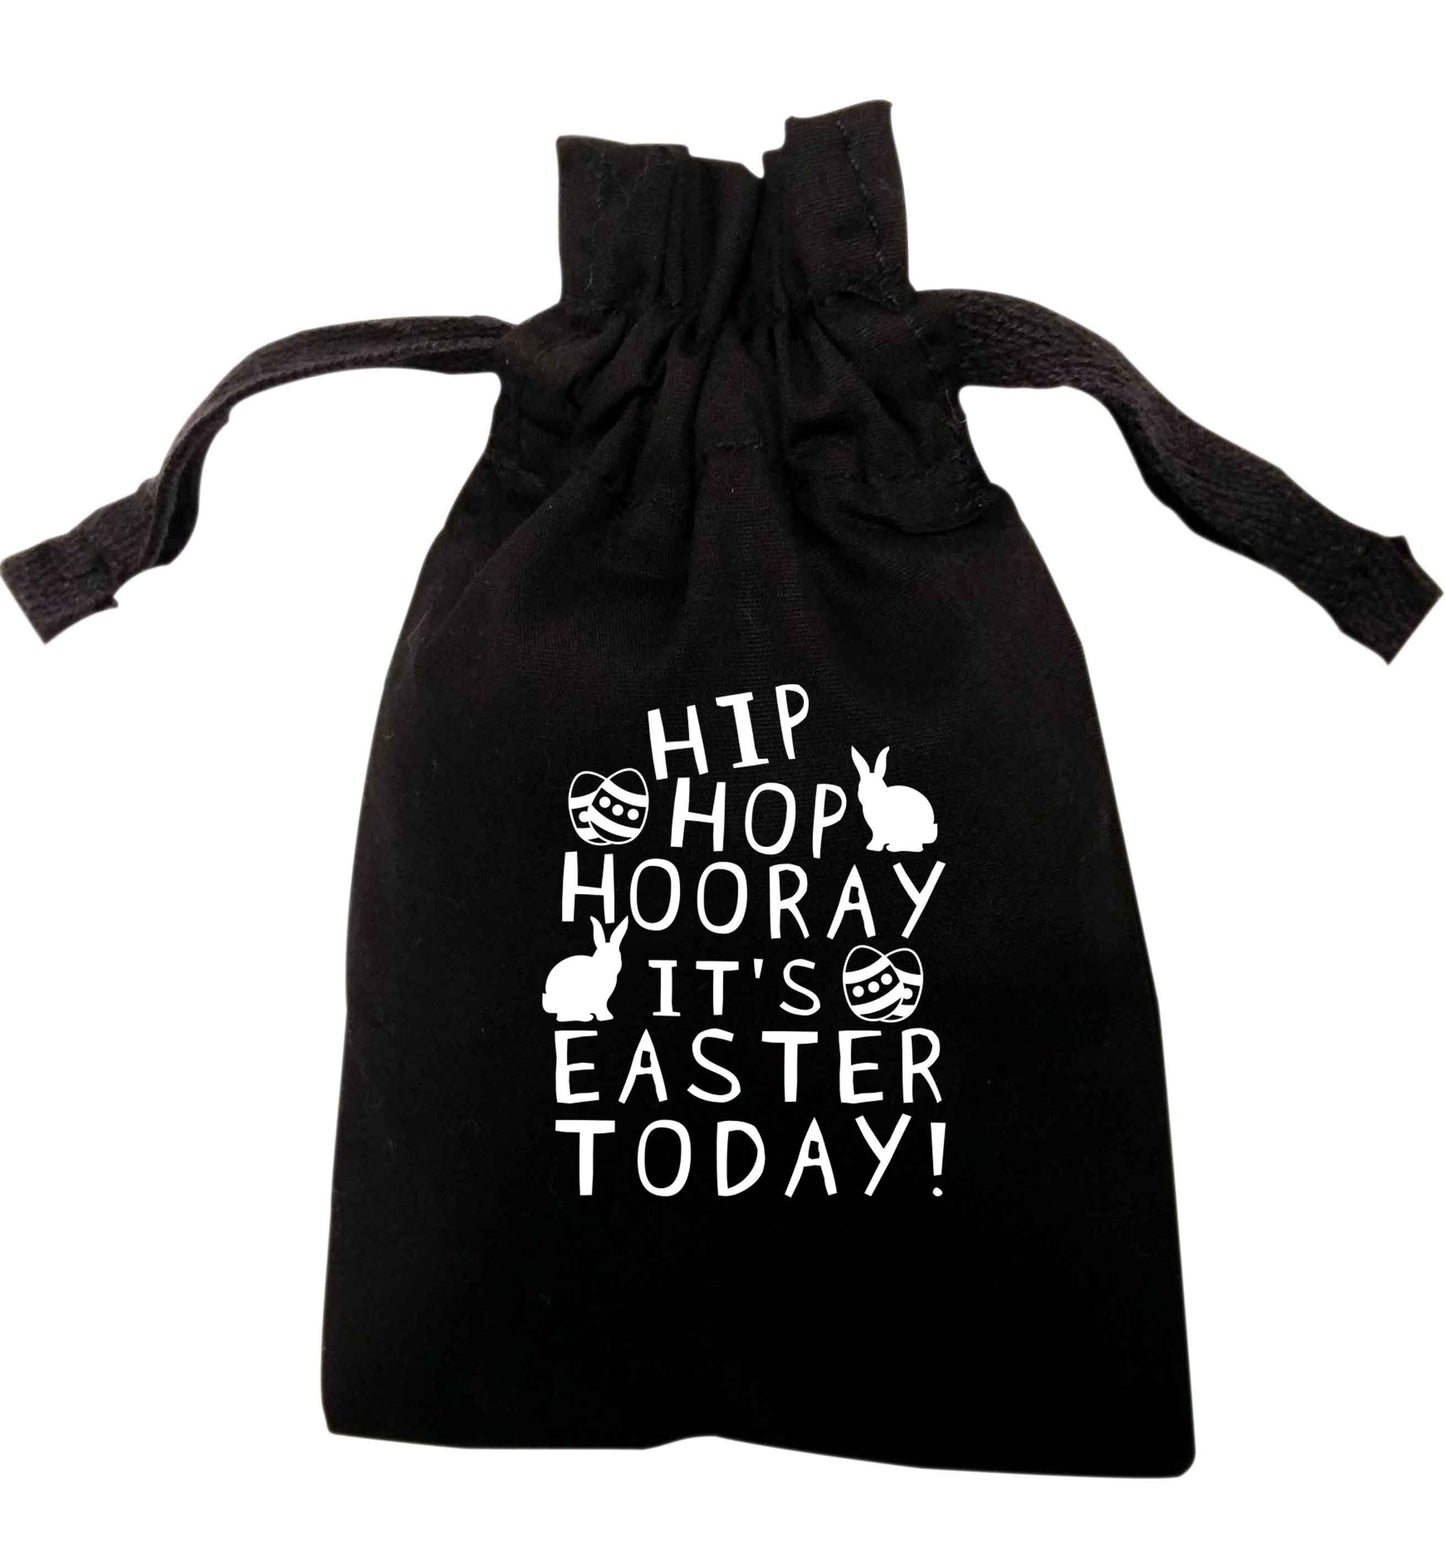 Hip hip hooray it's Easter today! | XS - L | Pouch / Drawstring bag / Sack | Organic Cotton | Bulk discounts available!